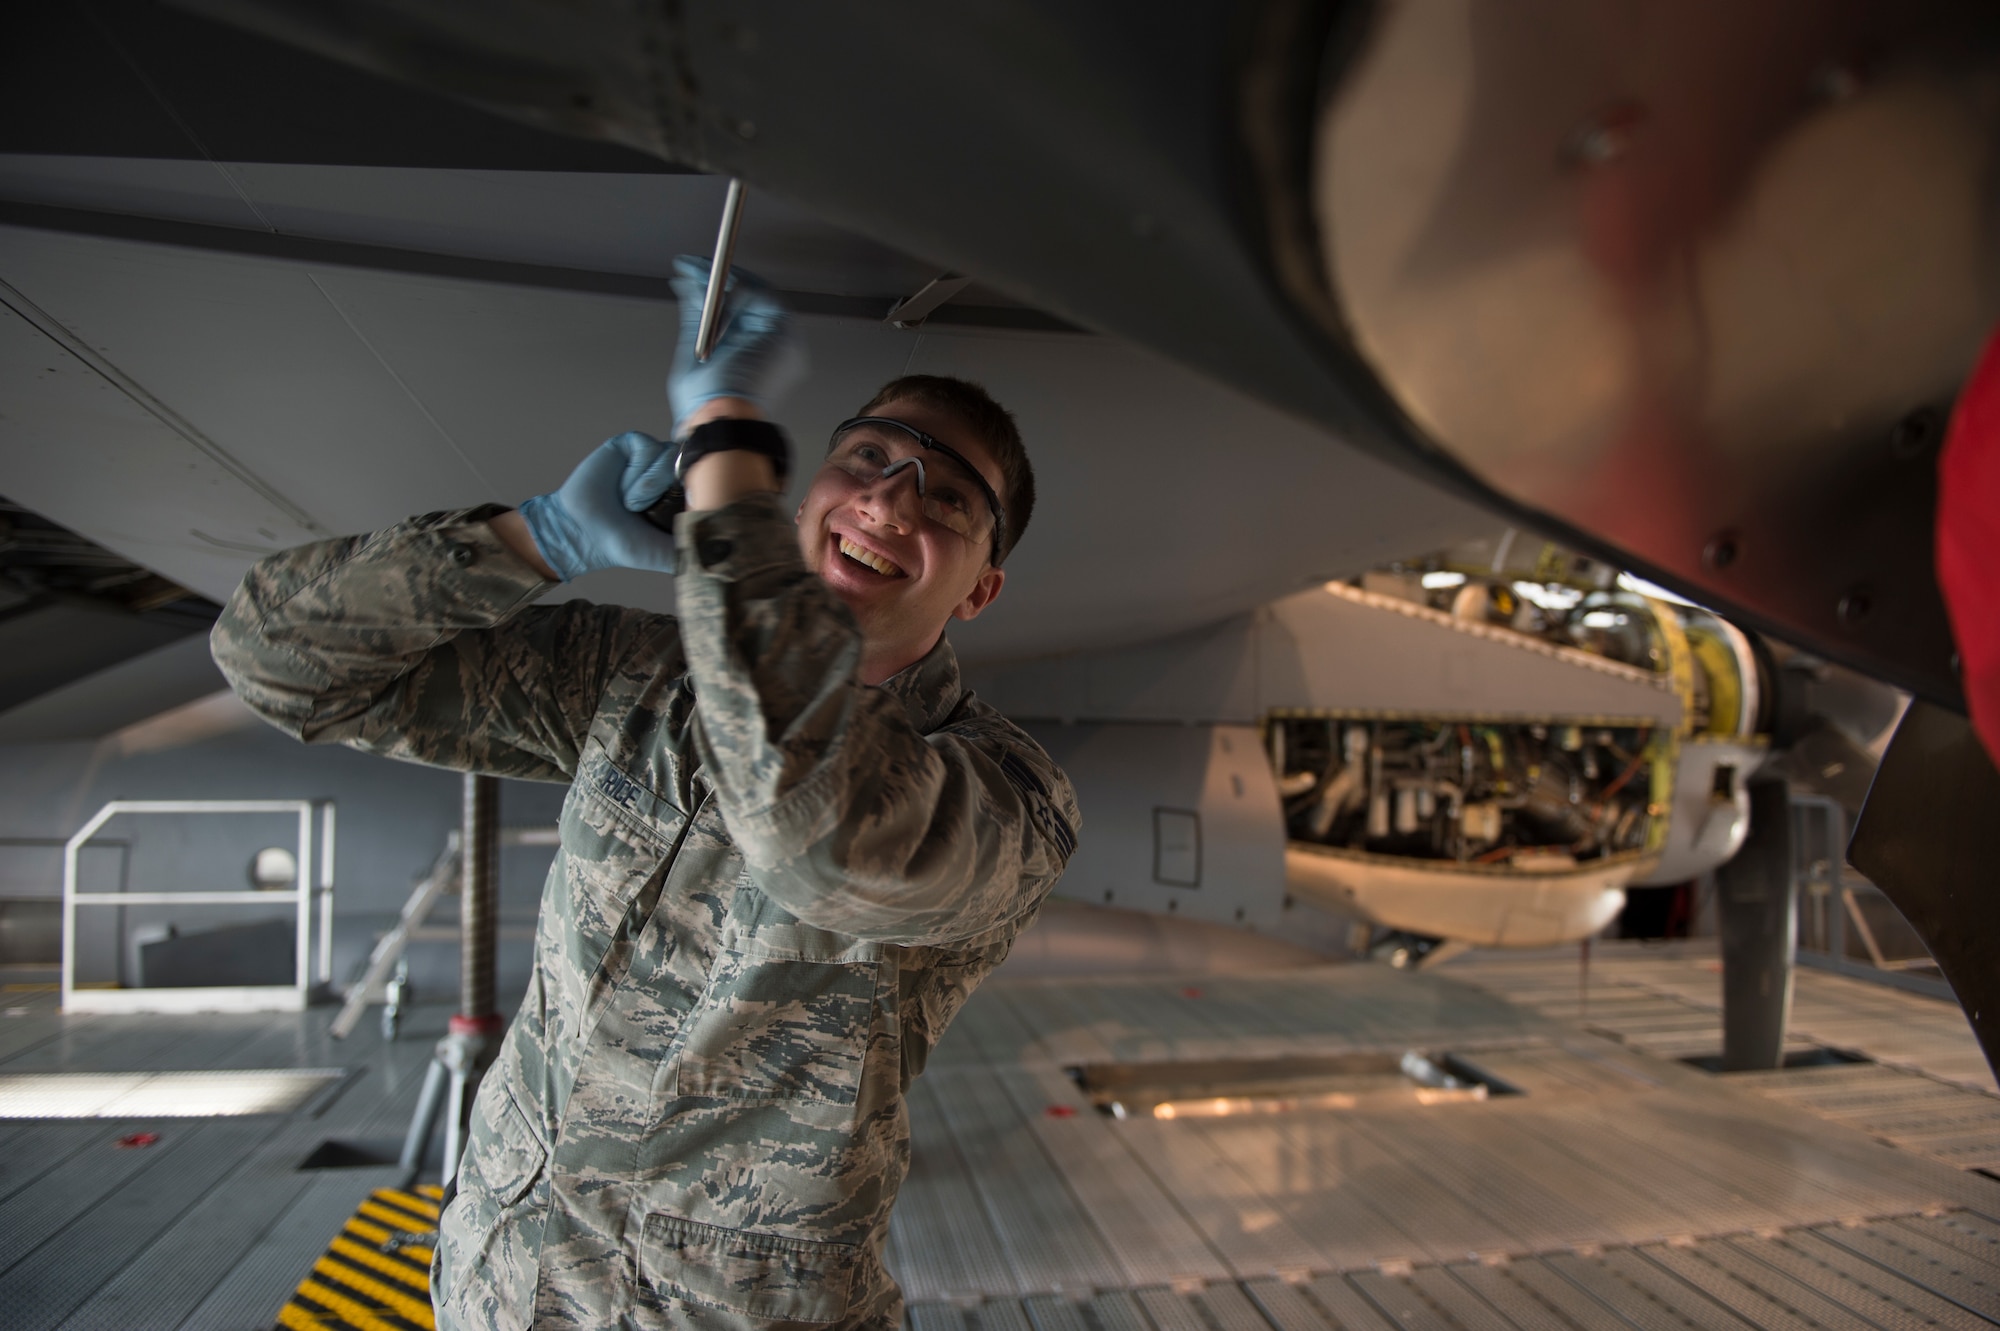 U.S. Air Force Senior Airman Joshua Rice, 86th Maintenance Squadron crew chief, unscrews a panel from a C-130J Super Hercules during an isochronal inspection on Ramstein Air Base, Germany, April 10, 2018. Isochronal inspections ensure aircraft remain reliable and operational for the Air Force’s missions. (U.S. Air Force photo by Senior Airman Joshua Magbanua)